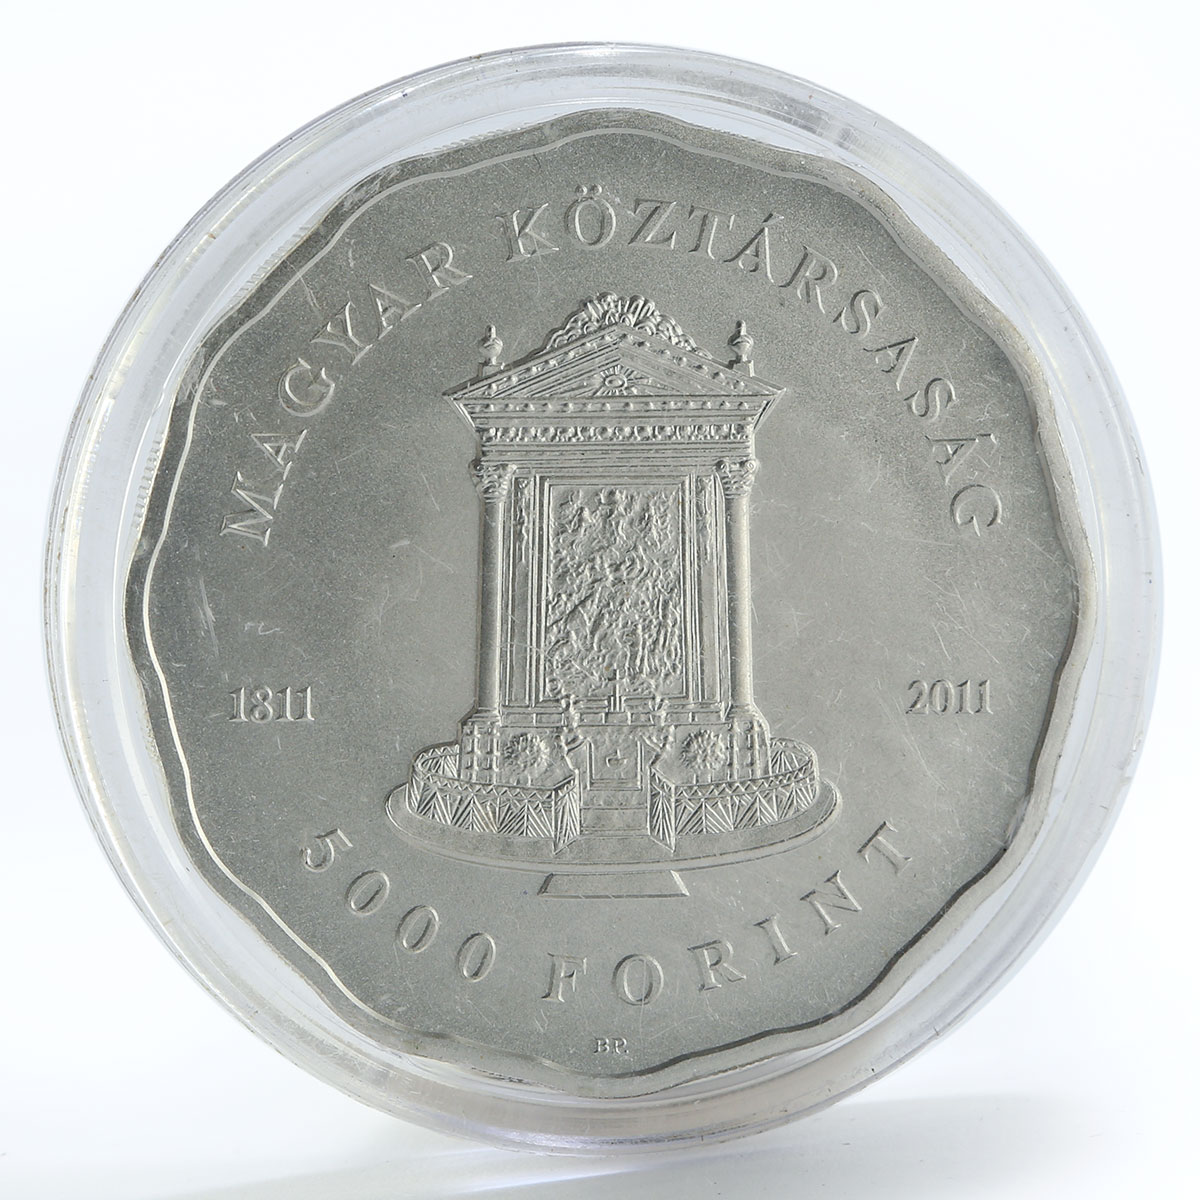 Hungary 5000 forint Lutheran Church of Budapest silver coin 2011